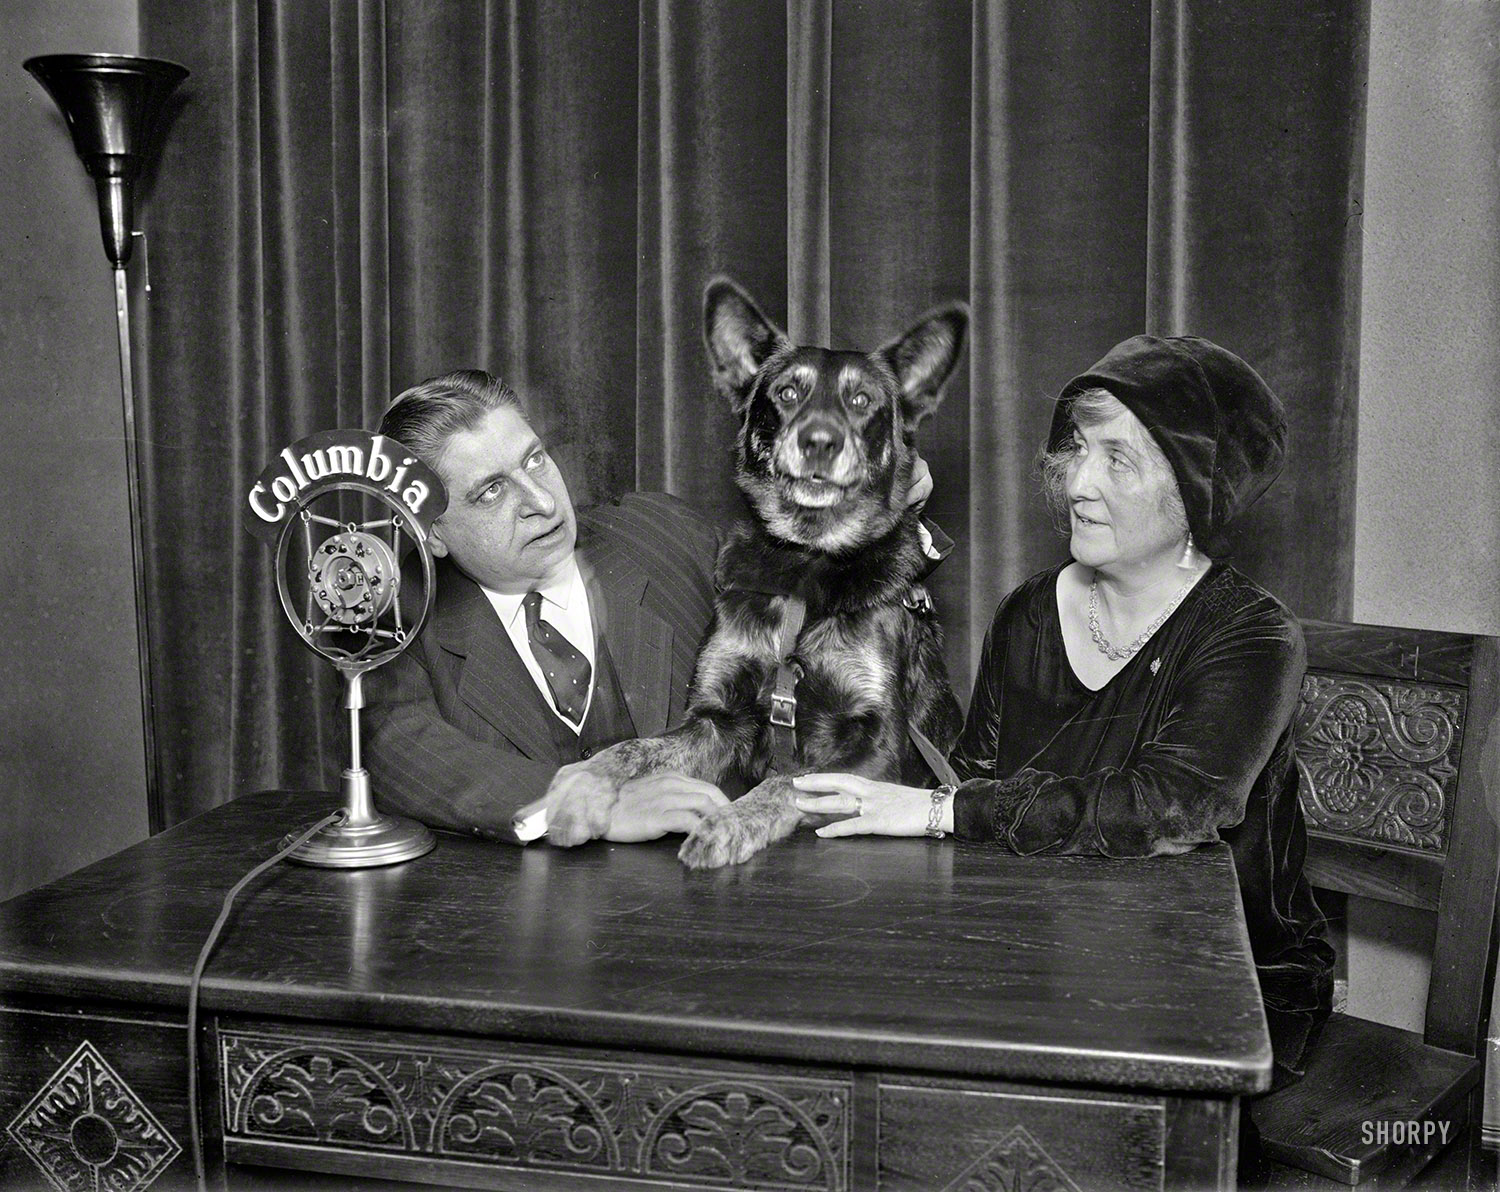 UPDATE: The photo now has a caption.

January or February 1930. Thomas David Schall with dog and woman at Columbia microphone.

Circa 1930 Washington, D.C. Not only can Fido sit, stay and speak, he (or she) can also broadcast. Unlabeled Harris & Ewing glass plate. View full size.